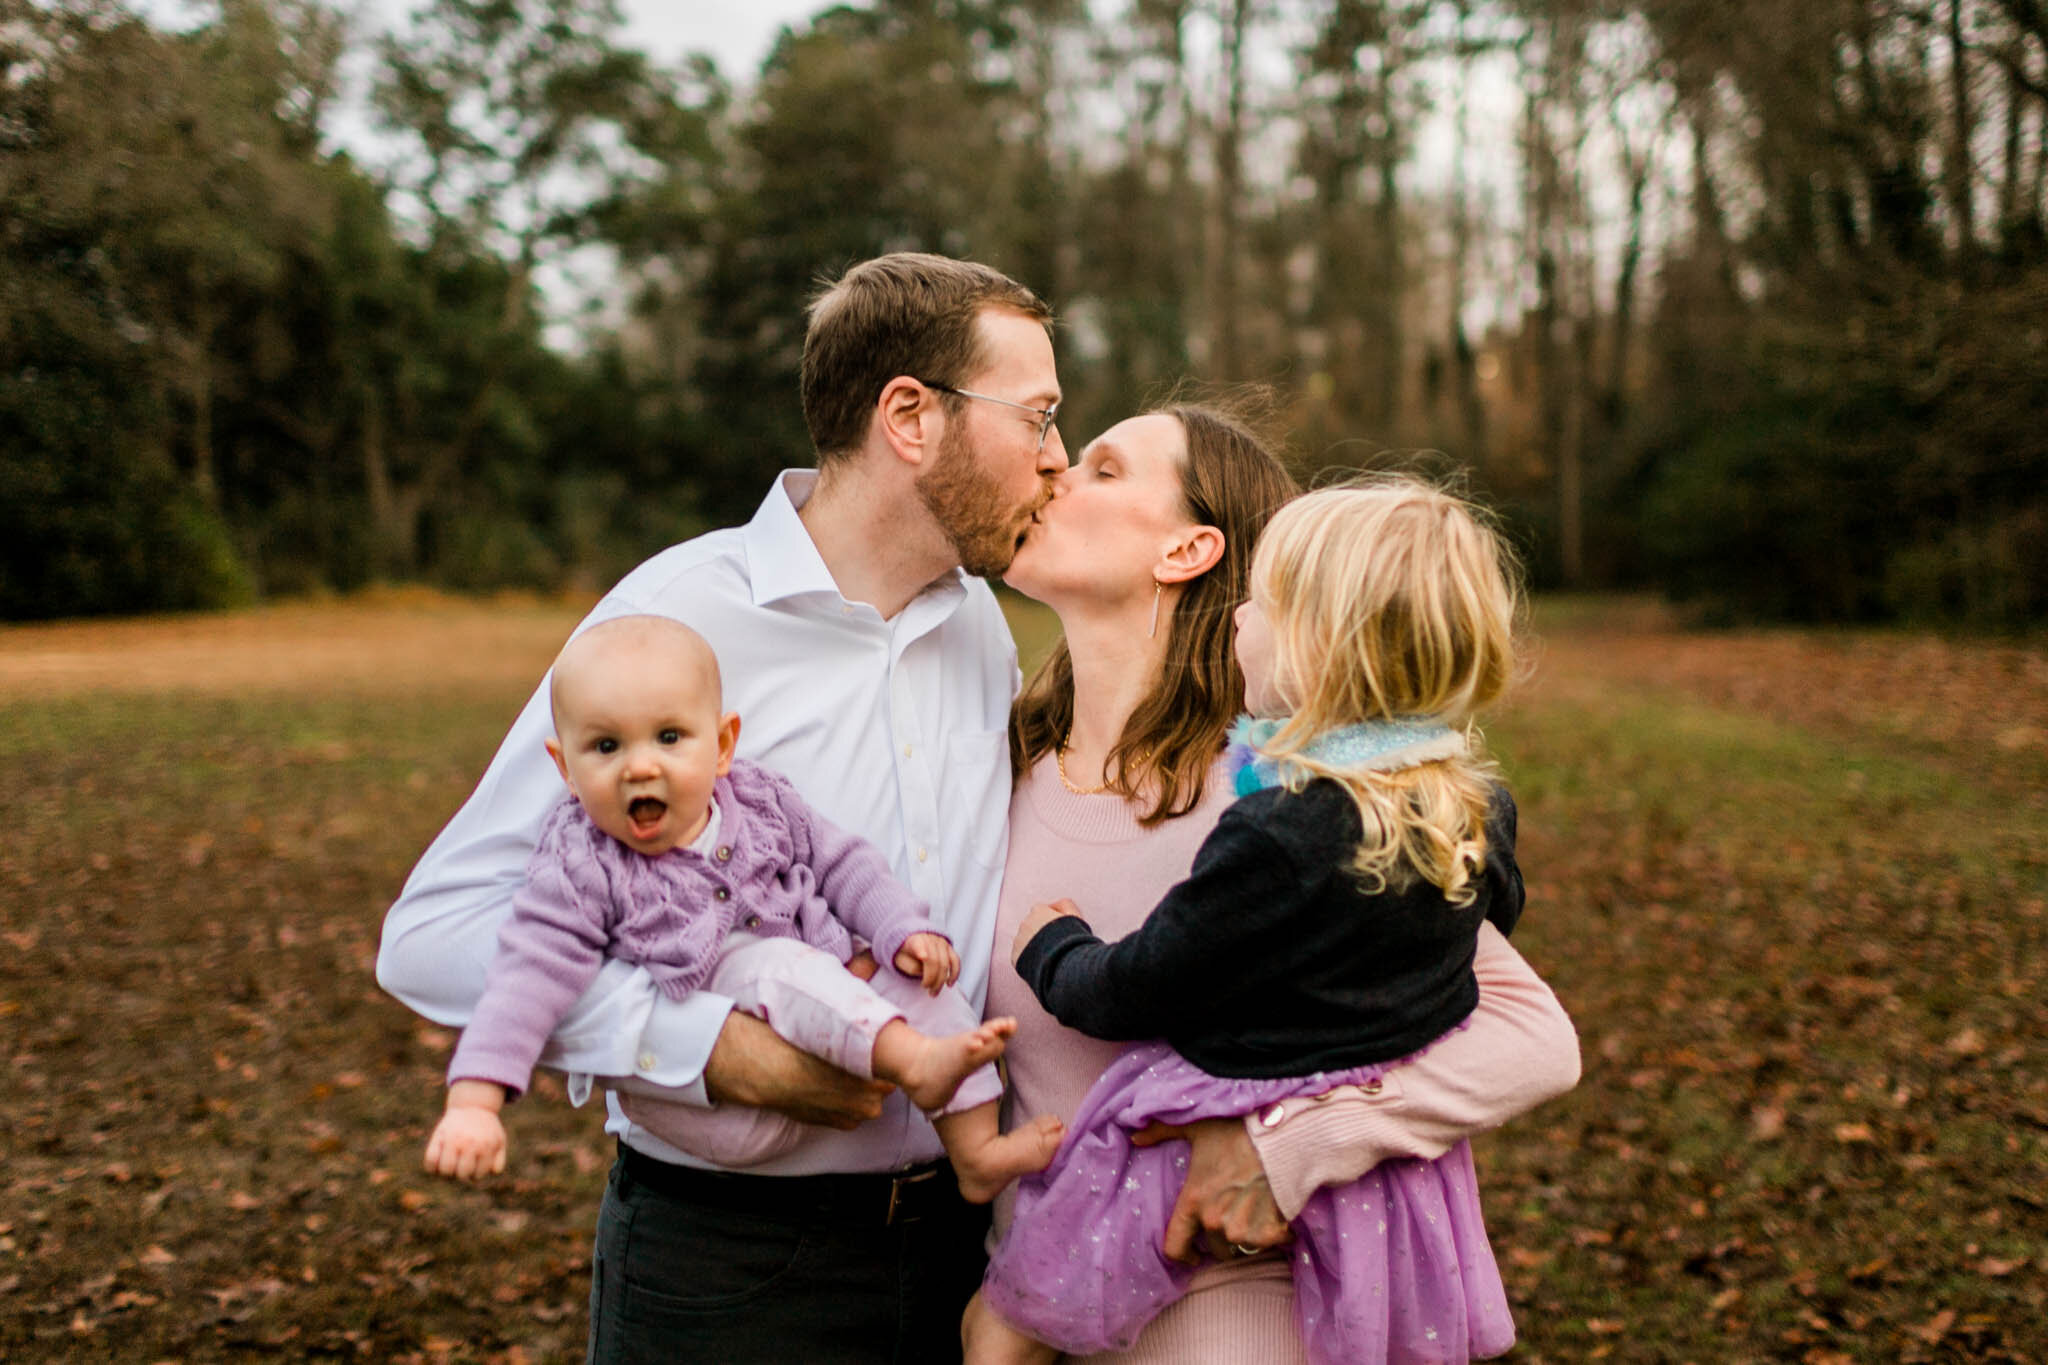 Durham Family Photographer | By G. Lin Photography | Parents kissing while holding children